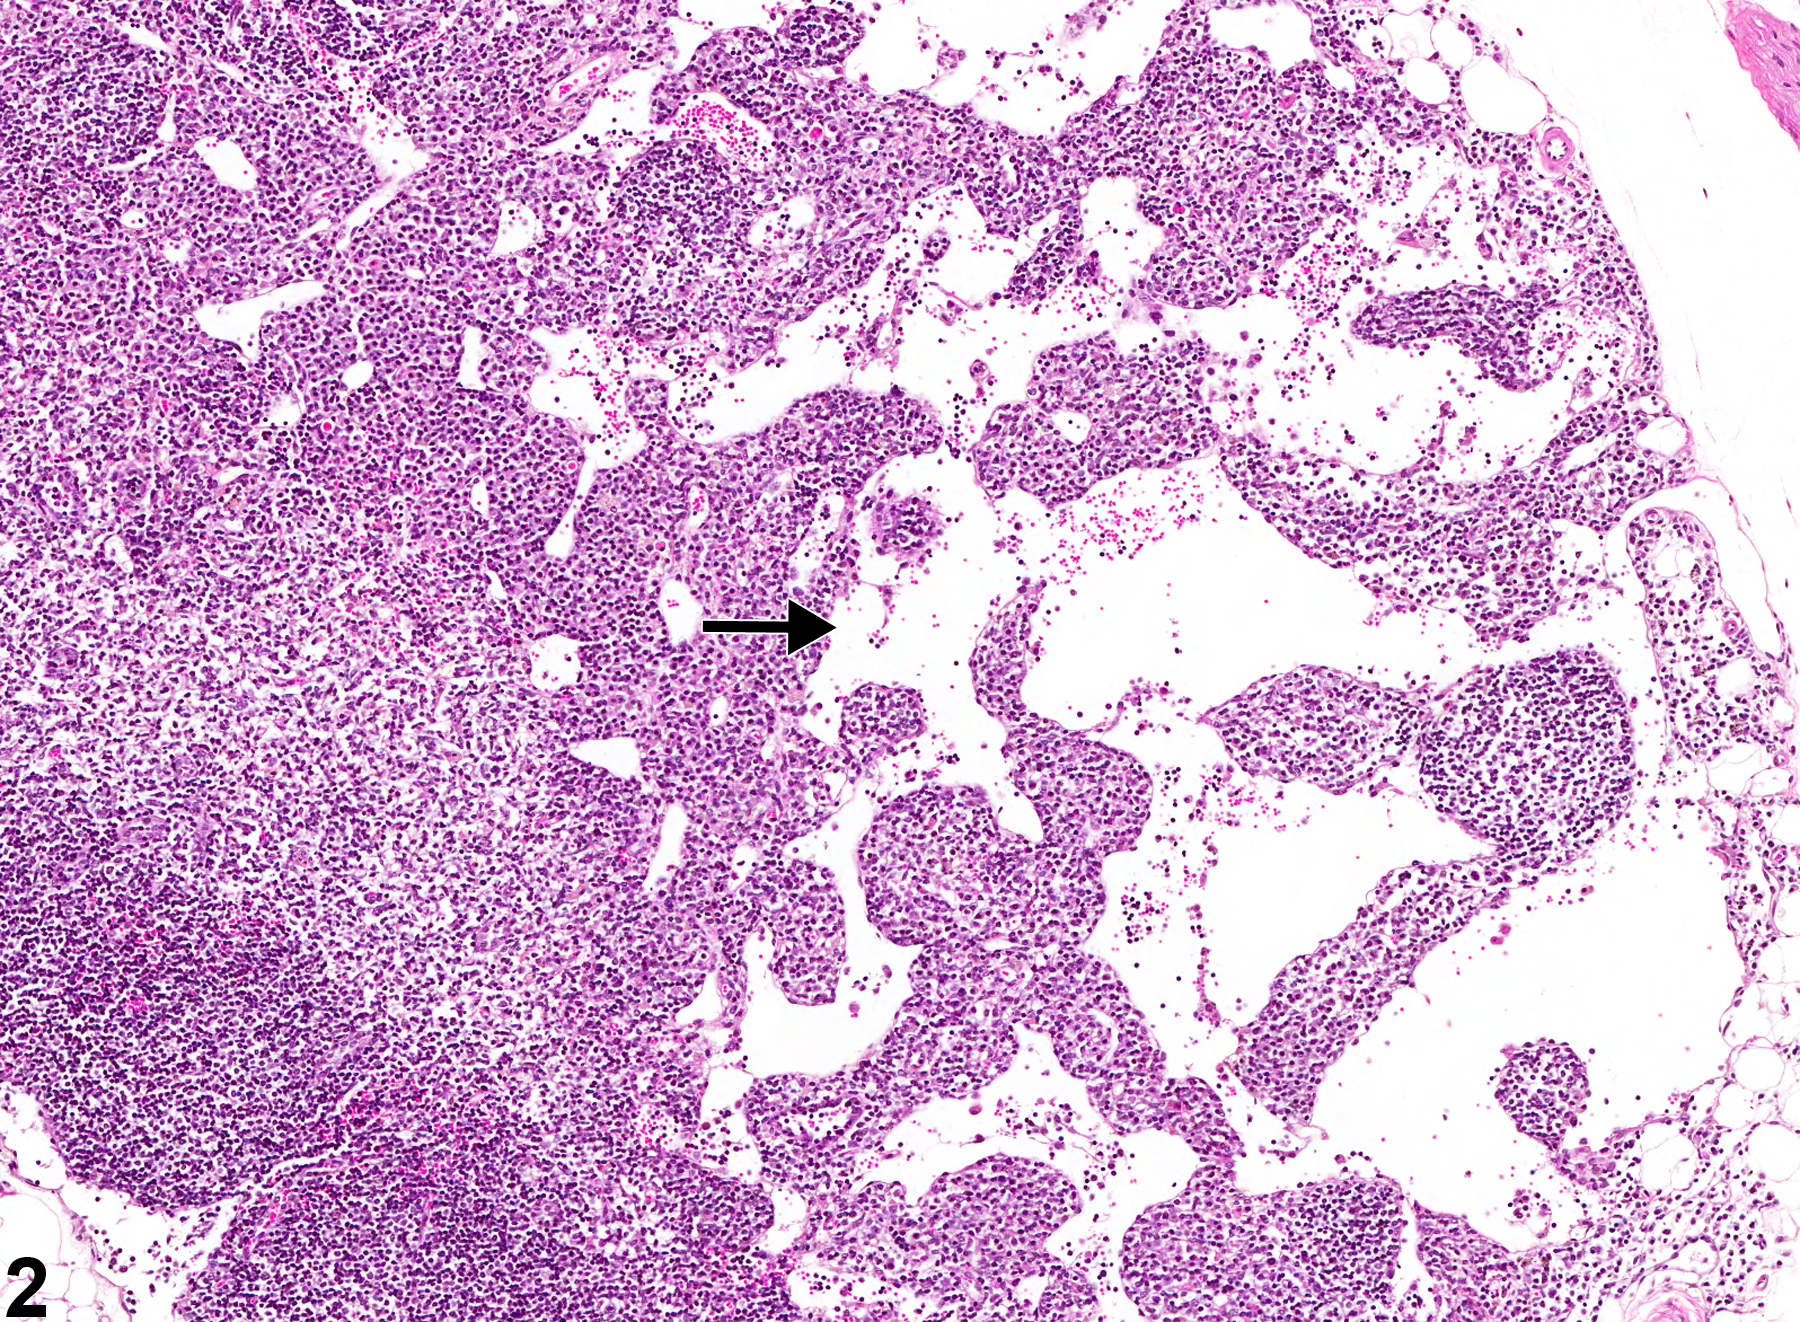 Image of lymphatic sinus, ectasia in the lymph node from a female B6C3F1/N mouse in a chronic study